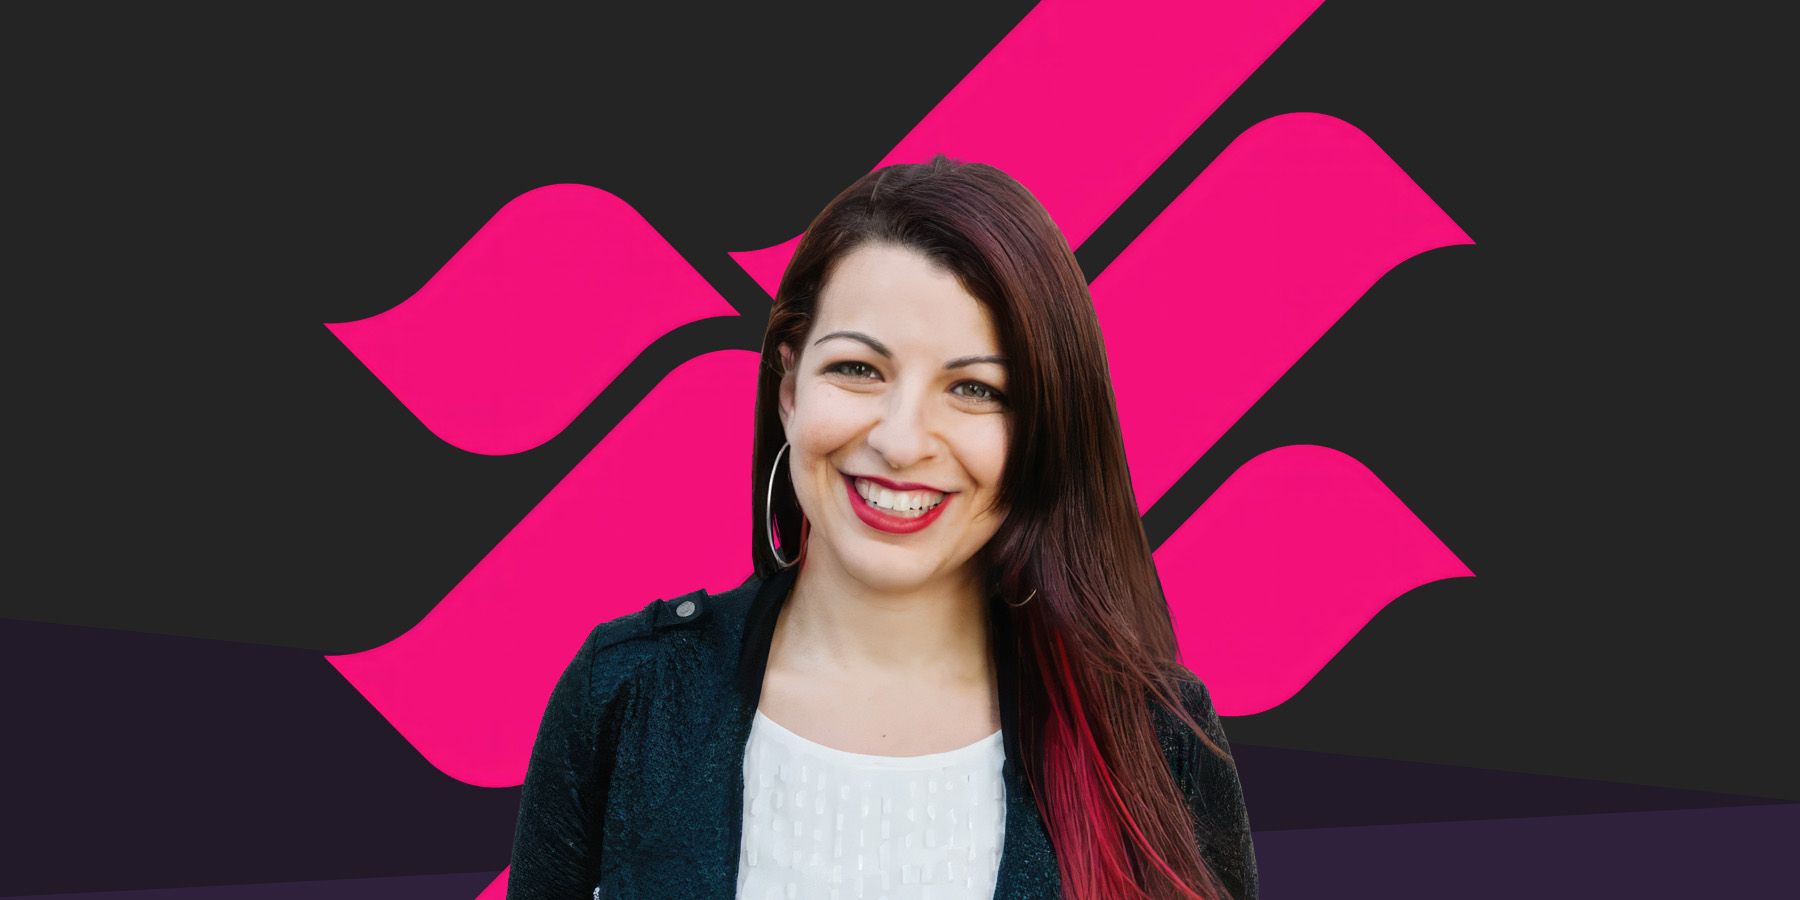 Anita Sarkeesian's Feminist Frequency shuts down after 15 years